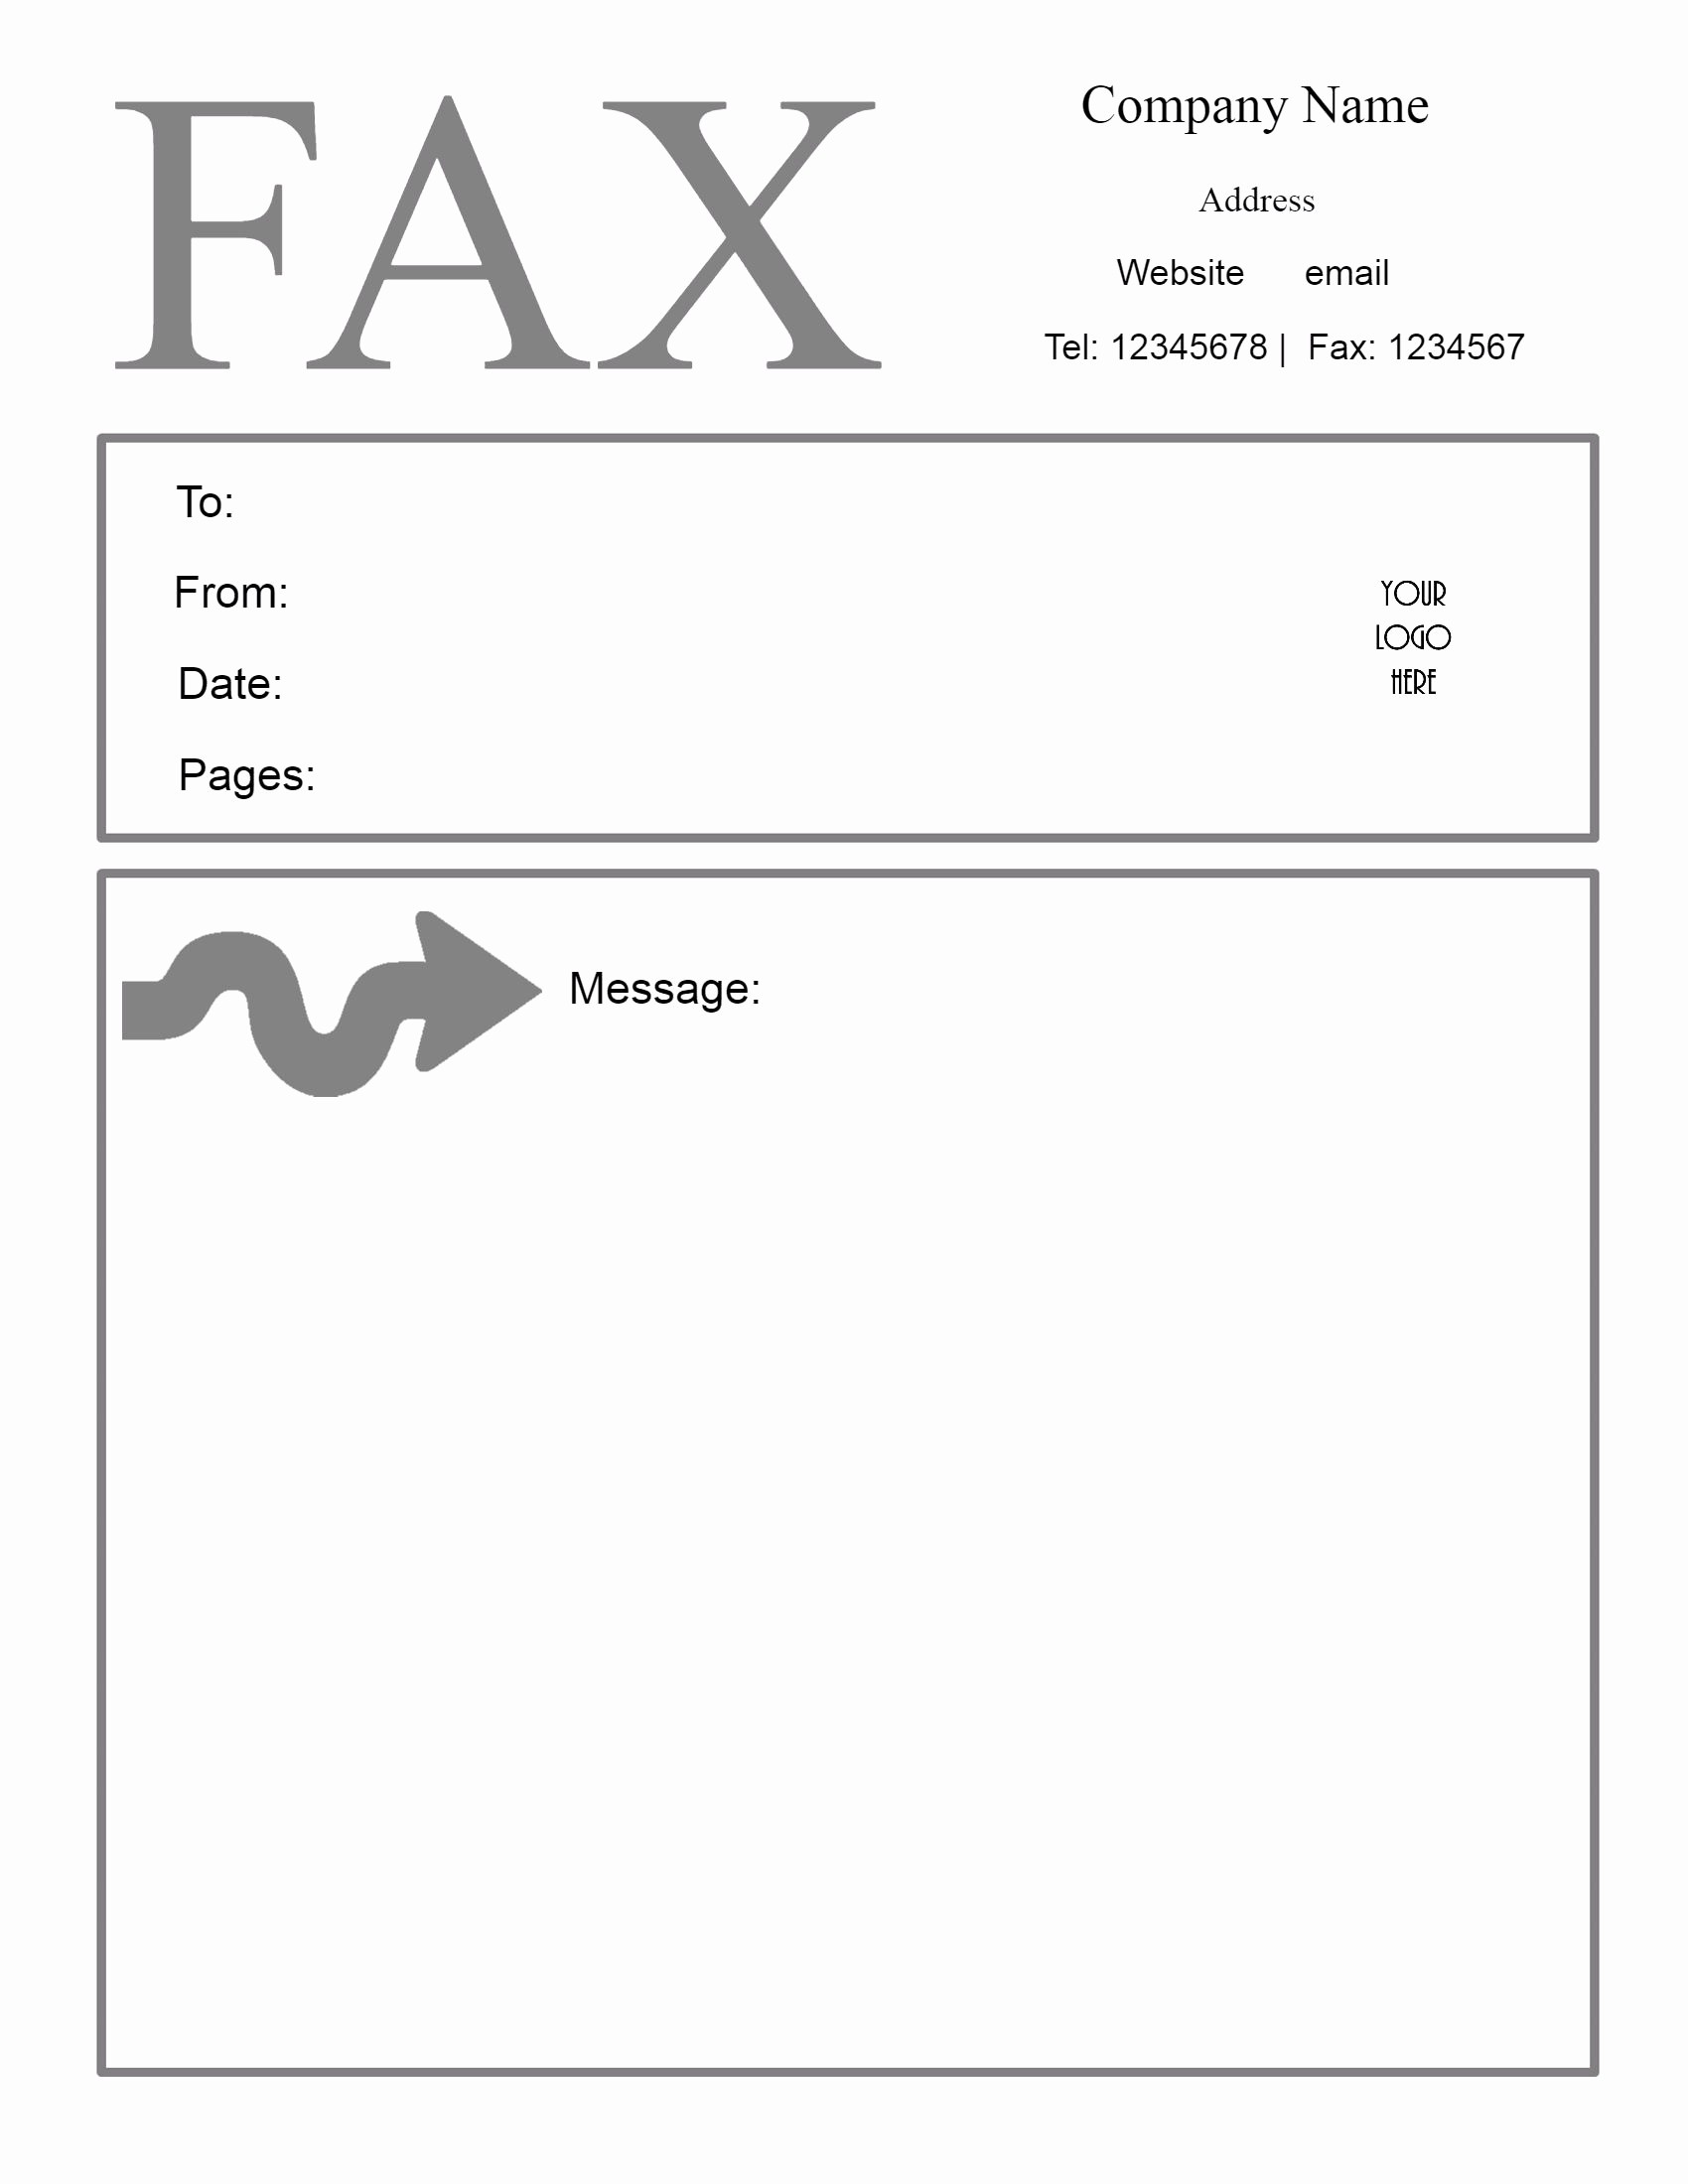 Samples Of Fax Cover Sheet Best Of Free Fax Cover Sheet Template